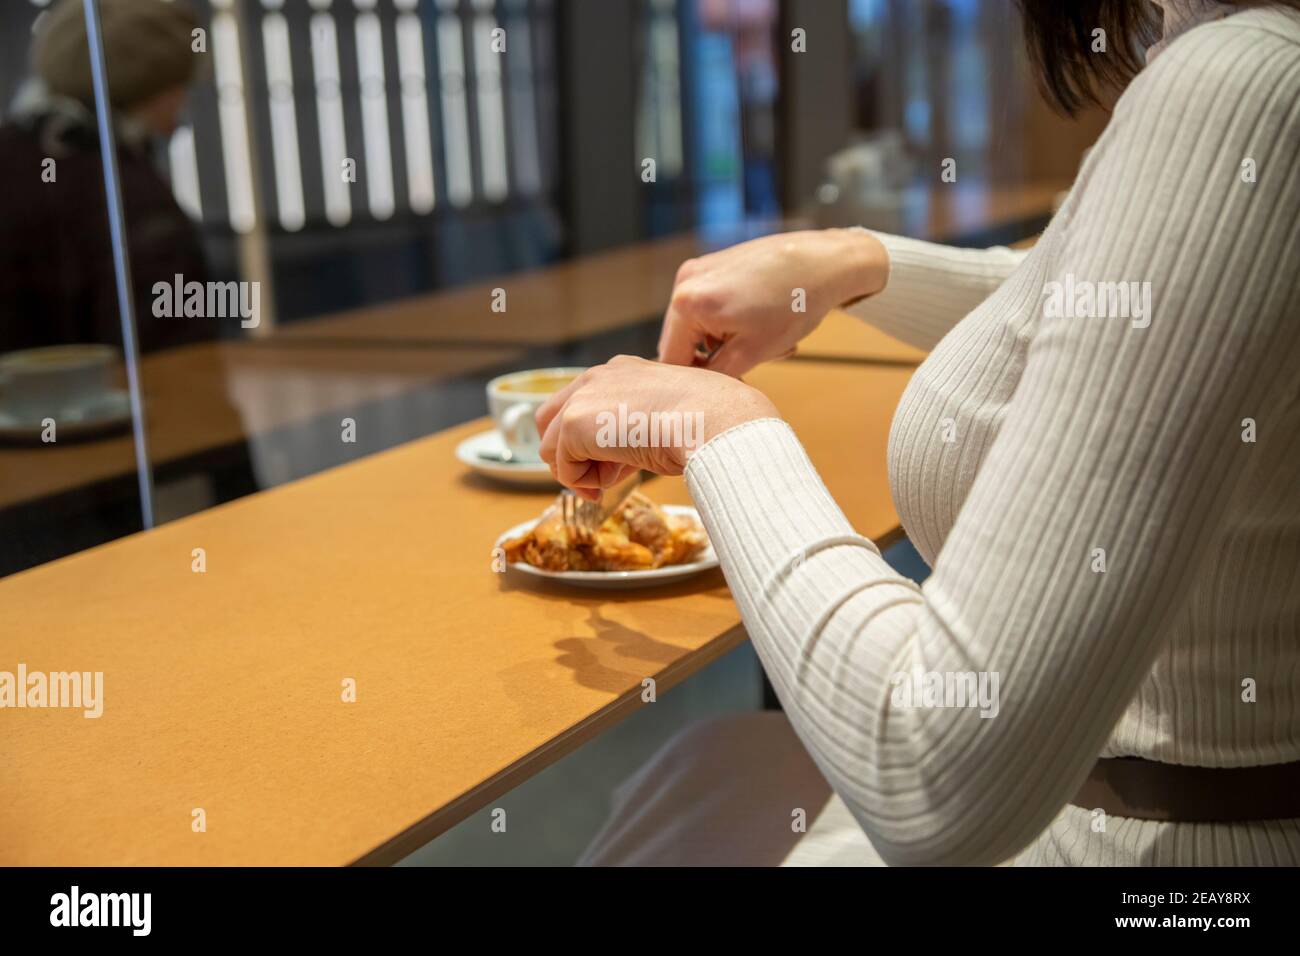 woman cuts croissant and drinks coffee at a table in a cafe. no face Stock Photo